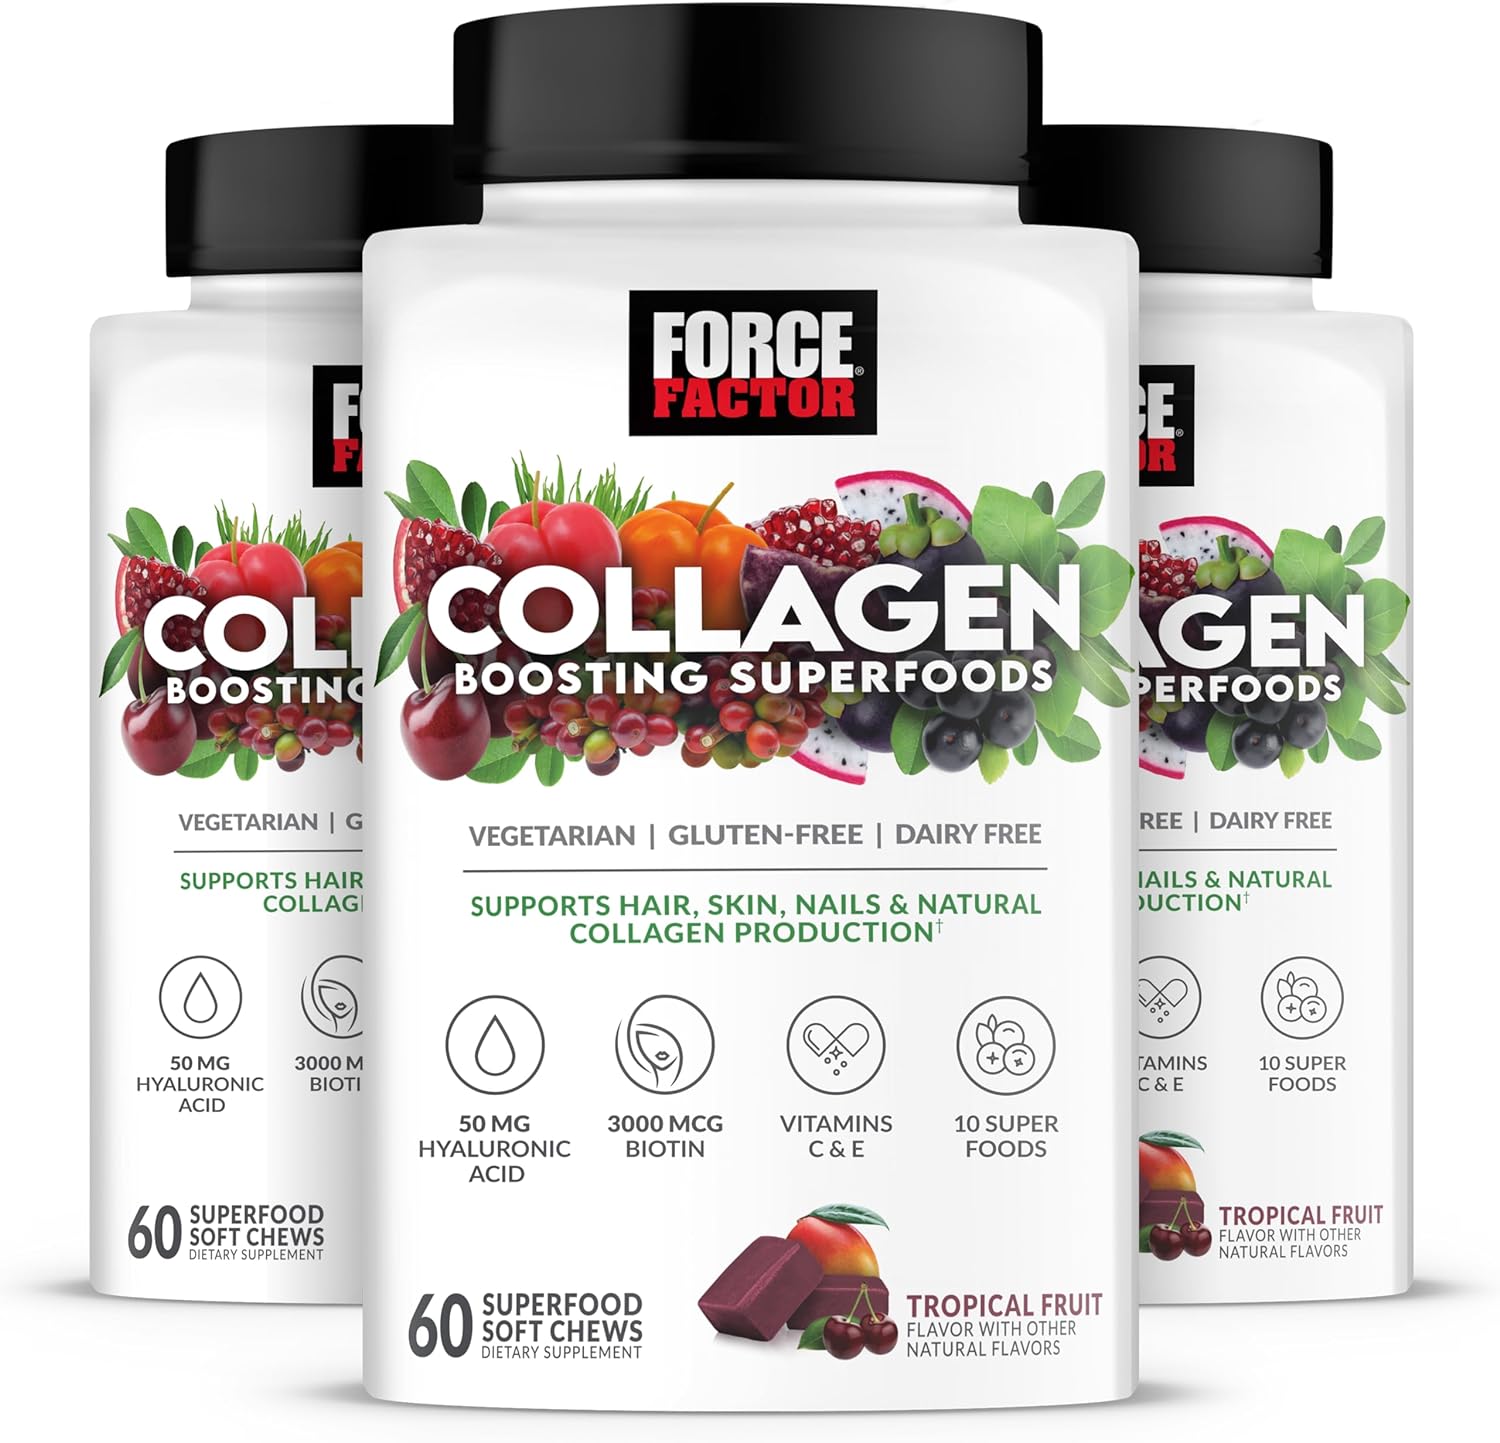 Force Factor Collagen Boosting Superfoods with Biotin, Hyaluronic Acid, Bamboo, and Hair, Skin, and Nails Vitamins, Nail and Skin Supplement, Tropical Fruit Flavor, 180 Soft Chews - 3 Pack